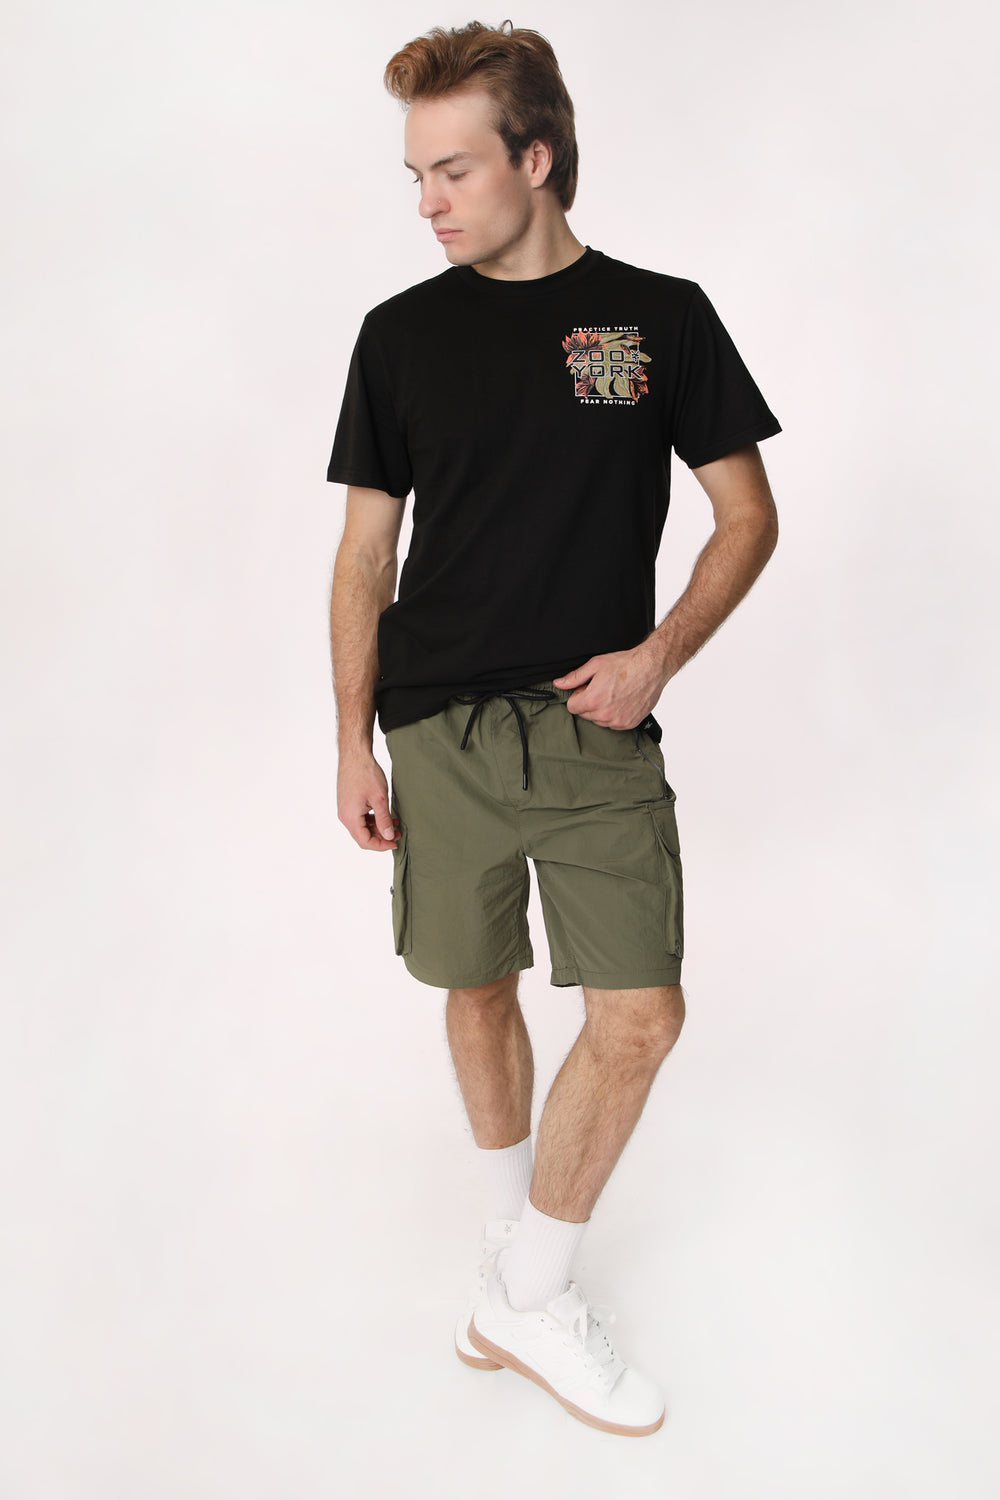 West49 Mens Nylon Cargo Shorts with Zip West49 Mens Nylon Cargo Shorts with Zip